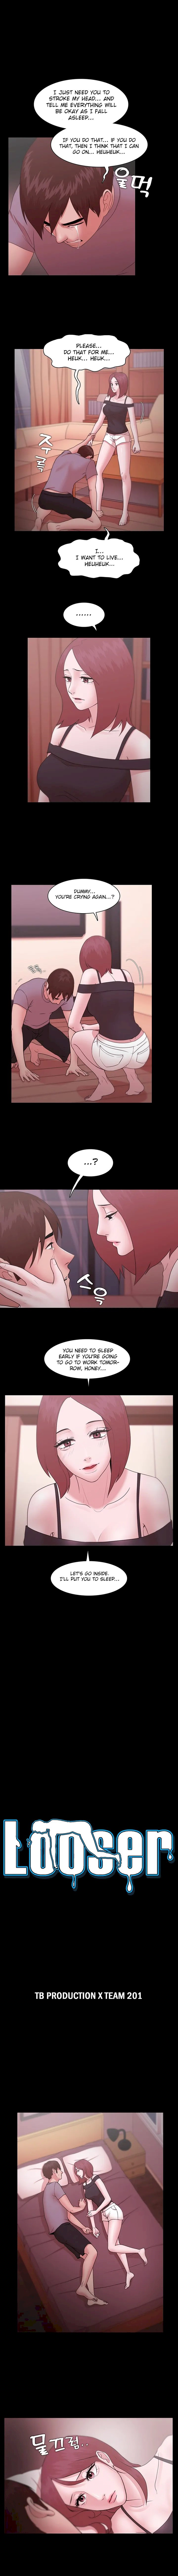 Loser (Team 201) - Chapter 12 Page 2